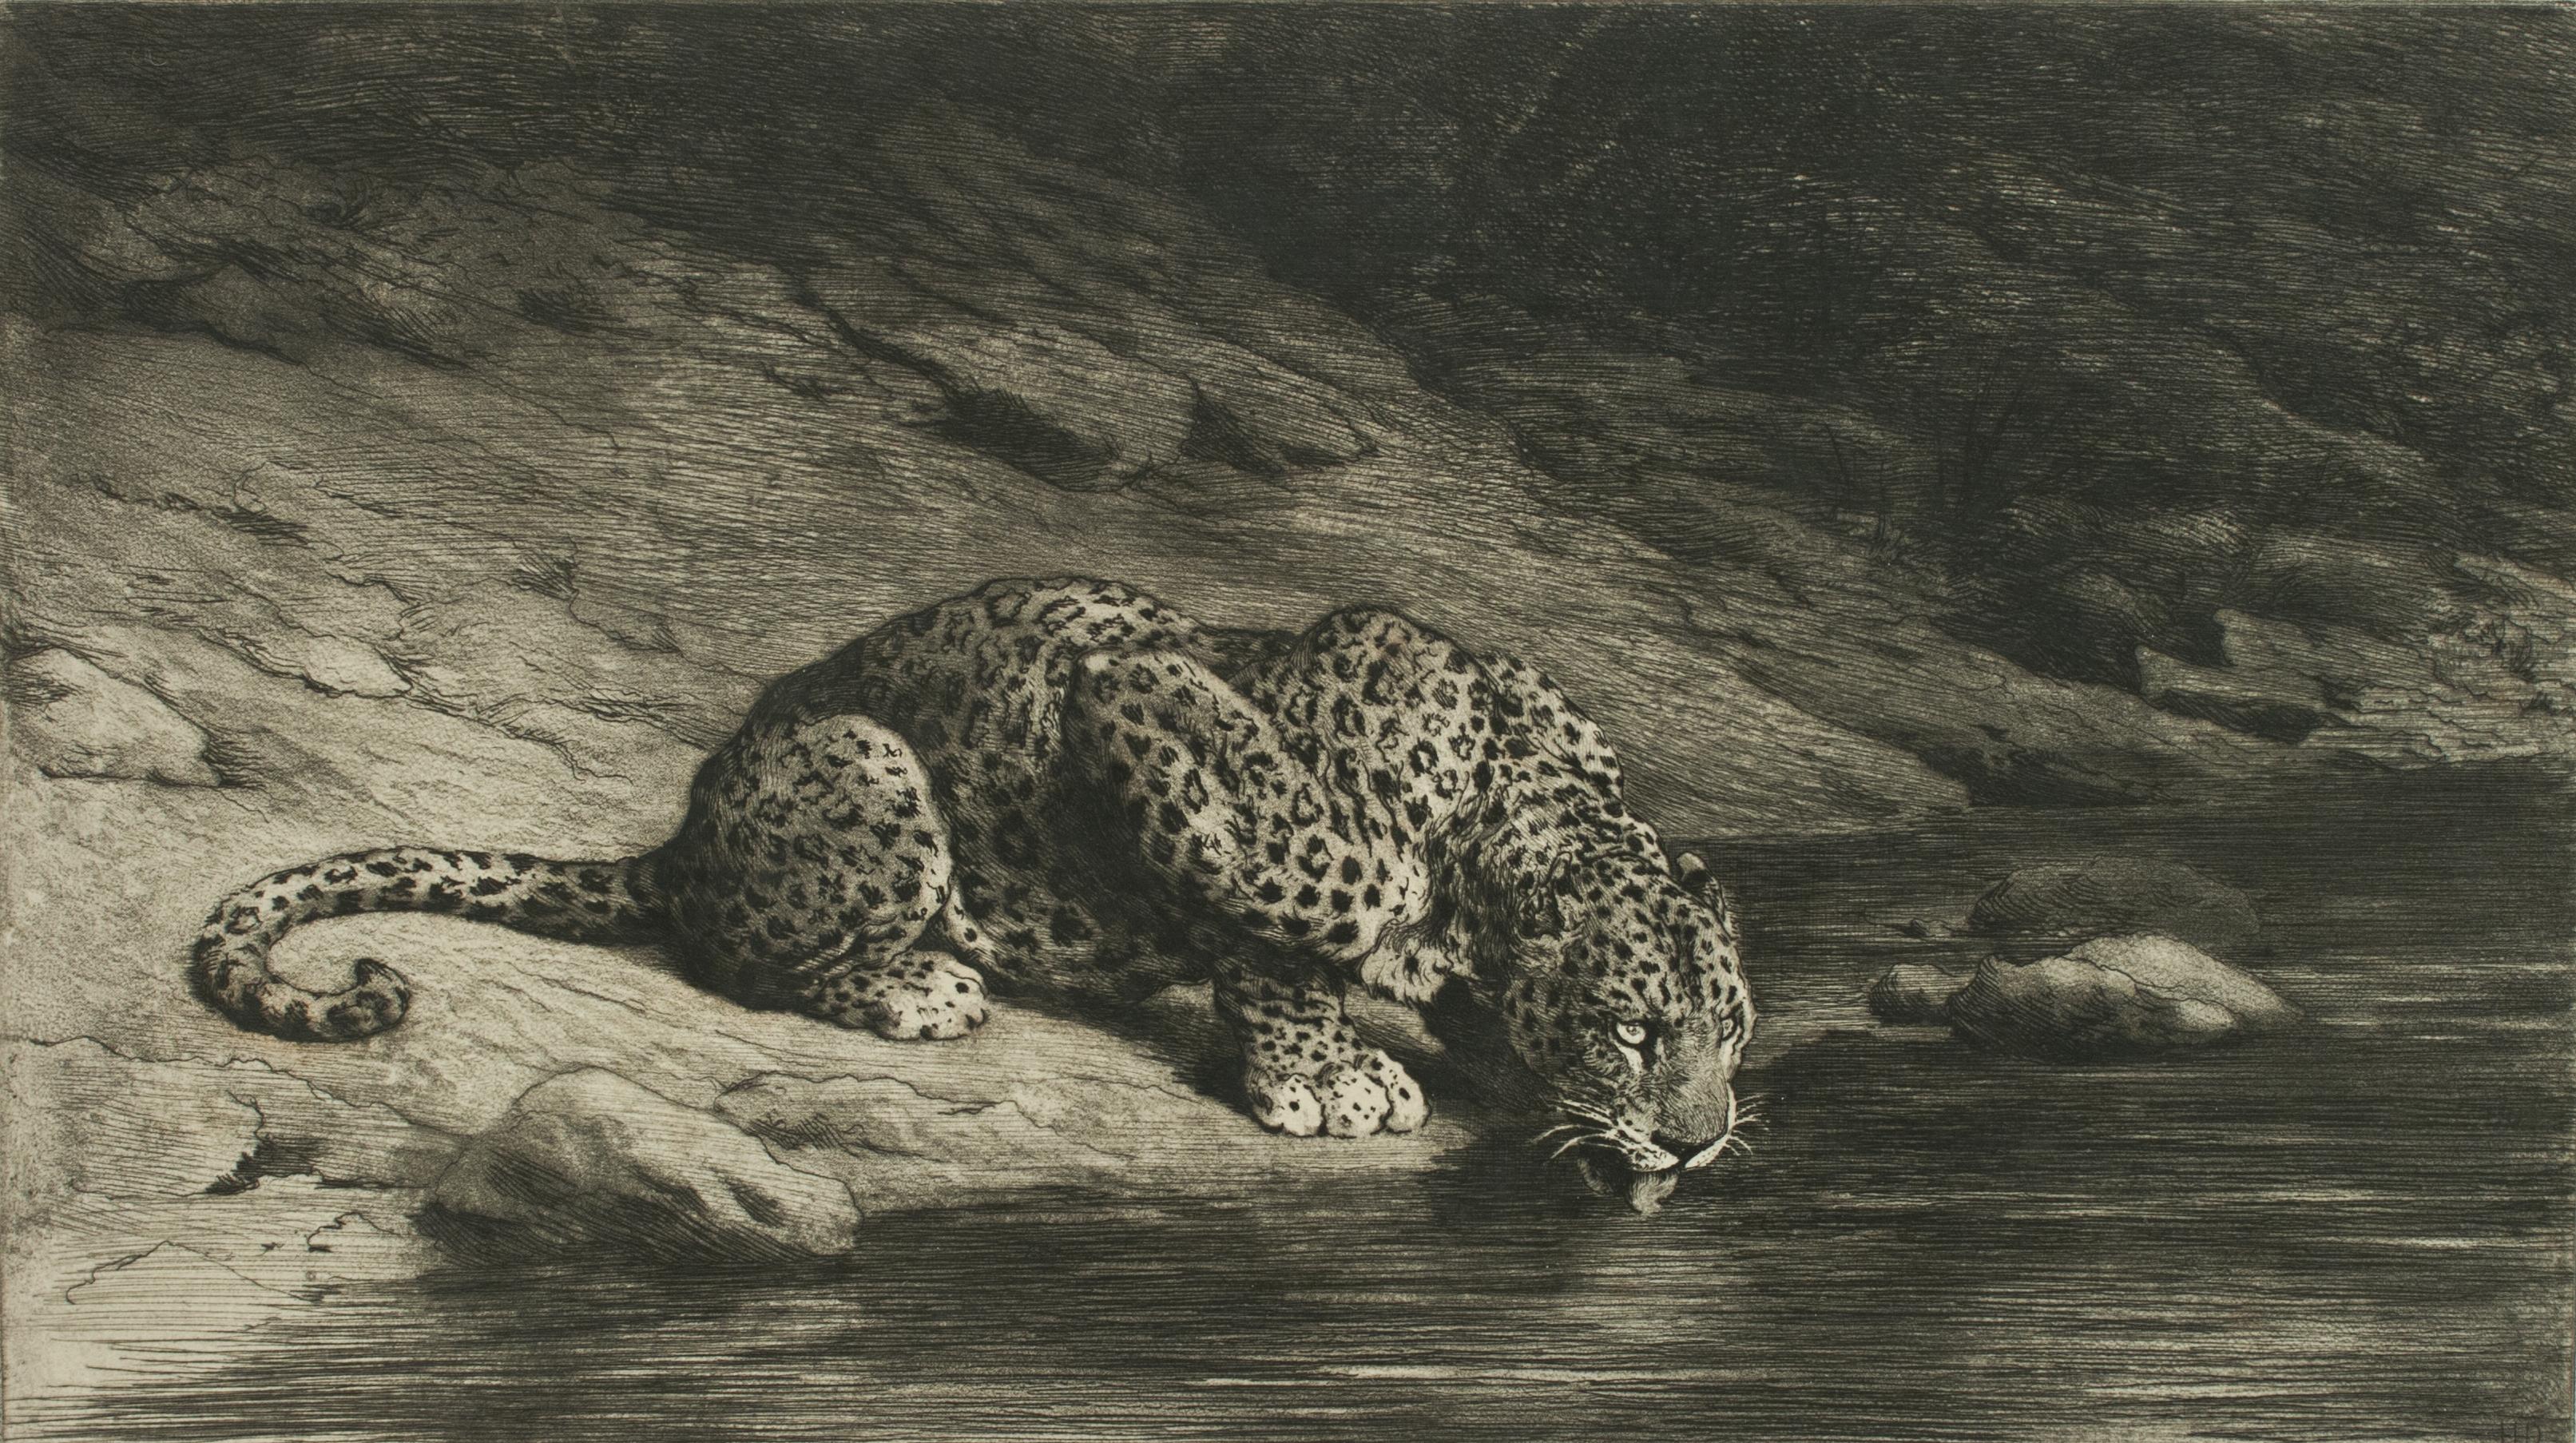 English Leopard Drinking from the River by Herbert Dicksee, Drinking at the Waters Edge 